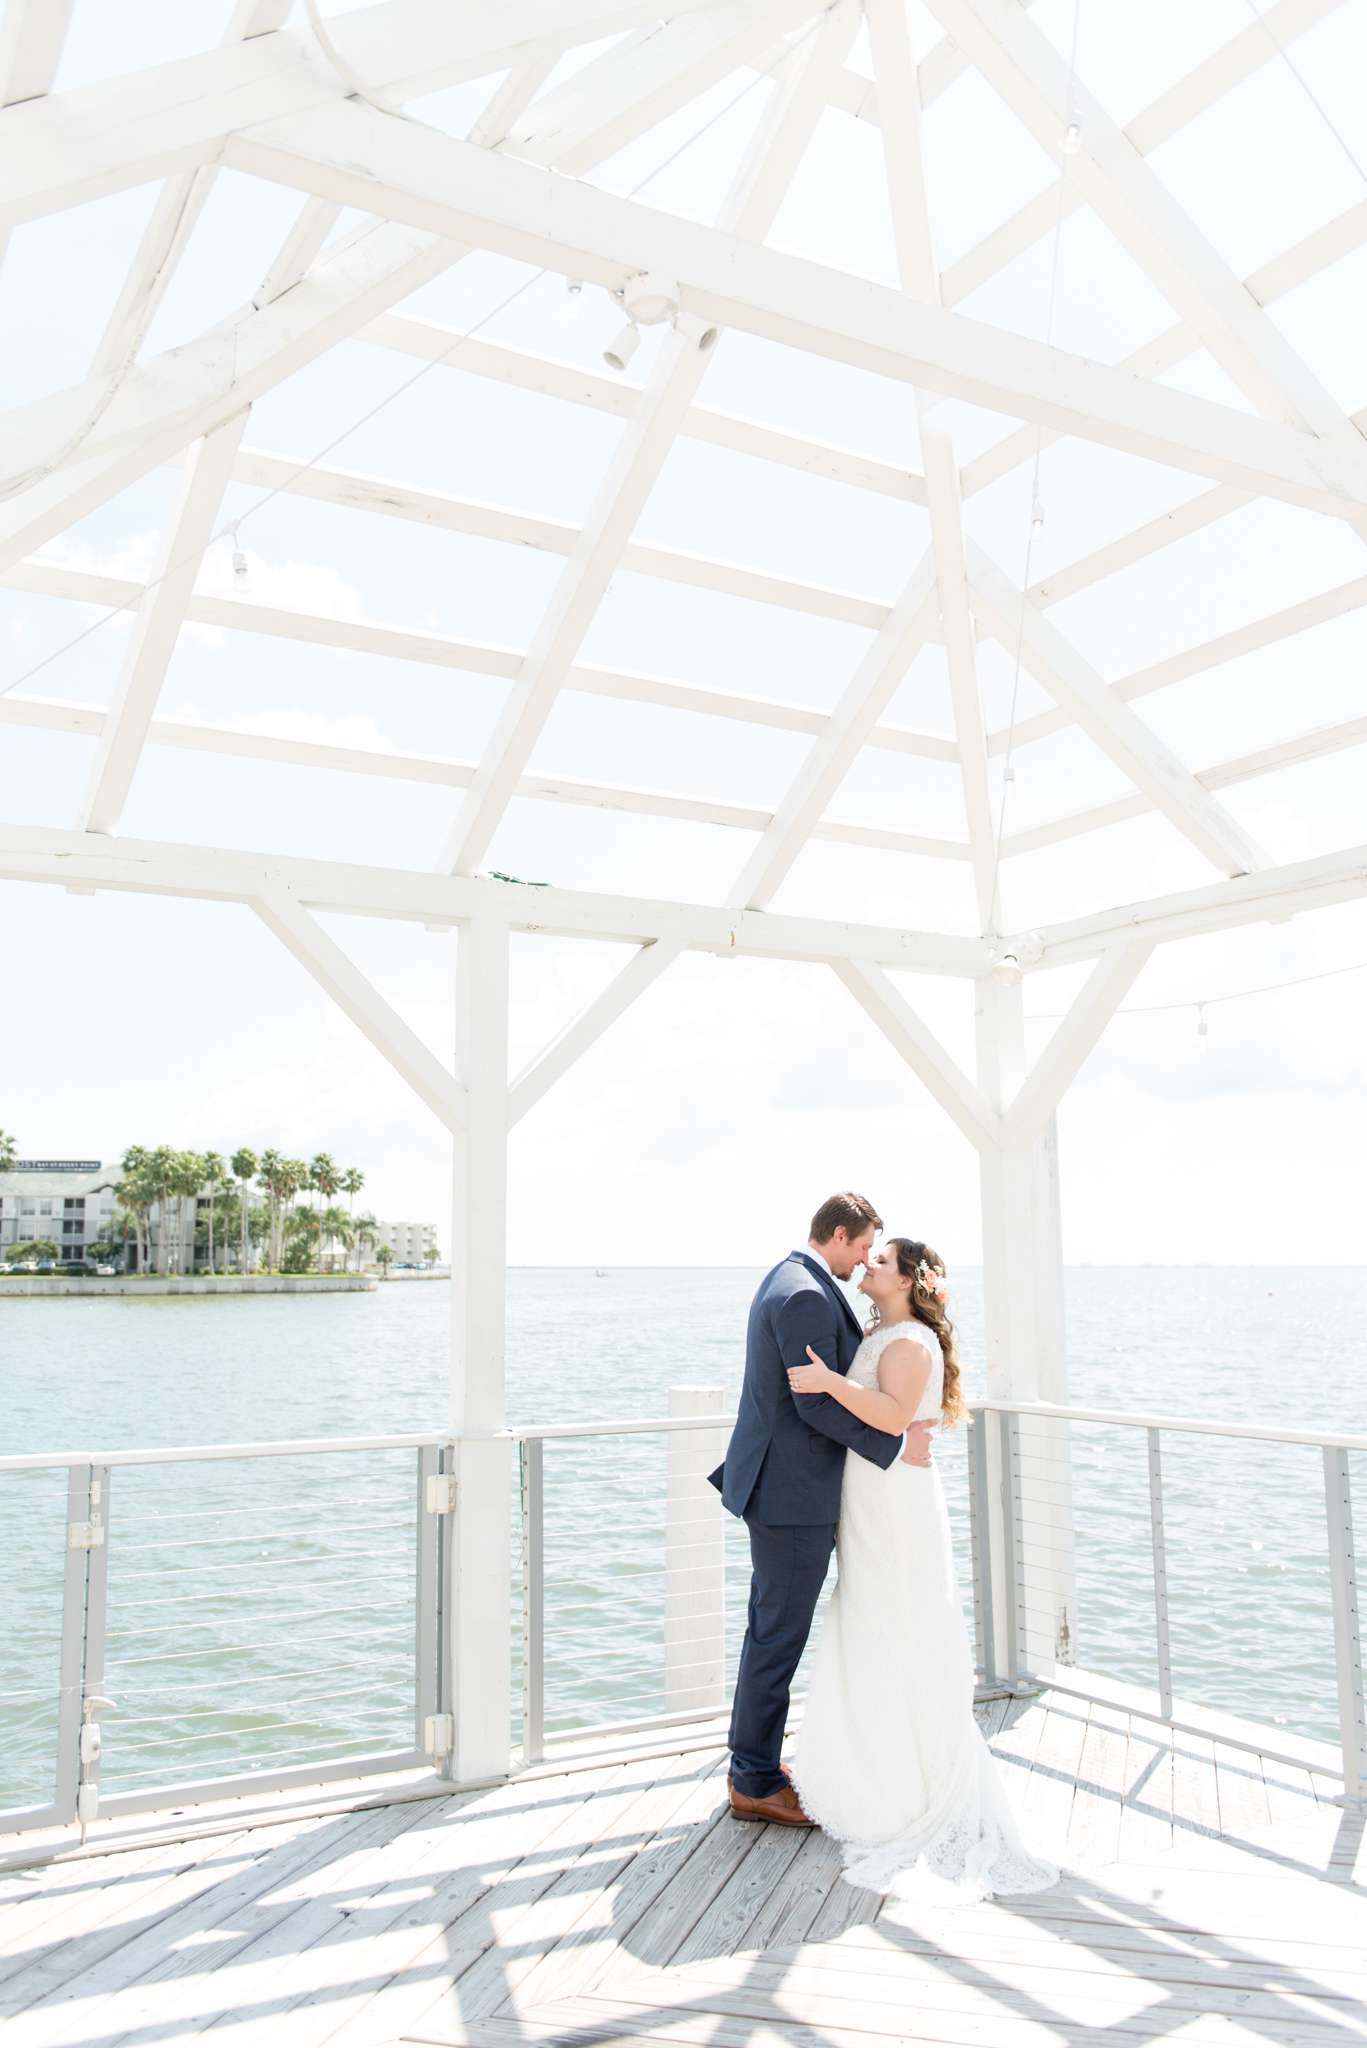 Bride and groom lean in for kiss on pier.